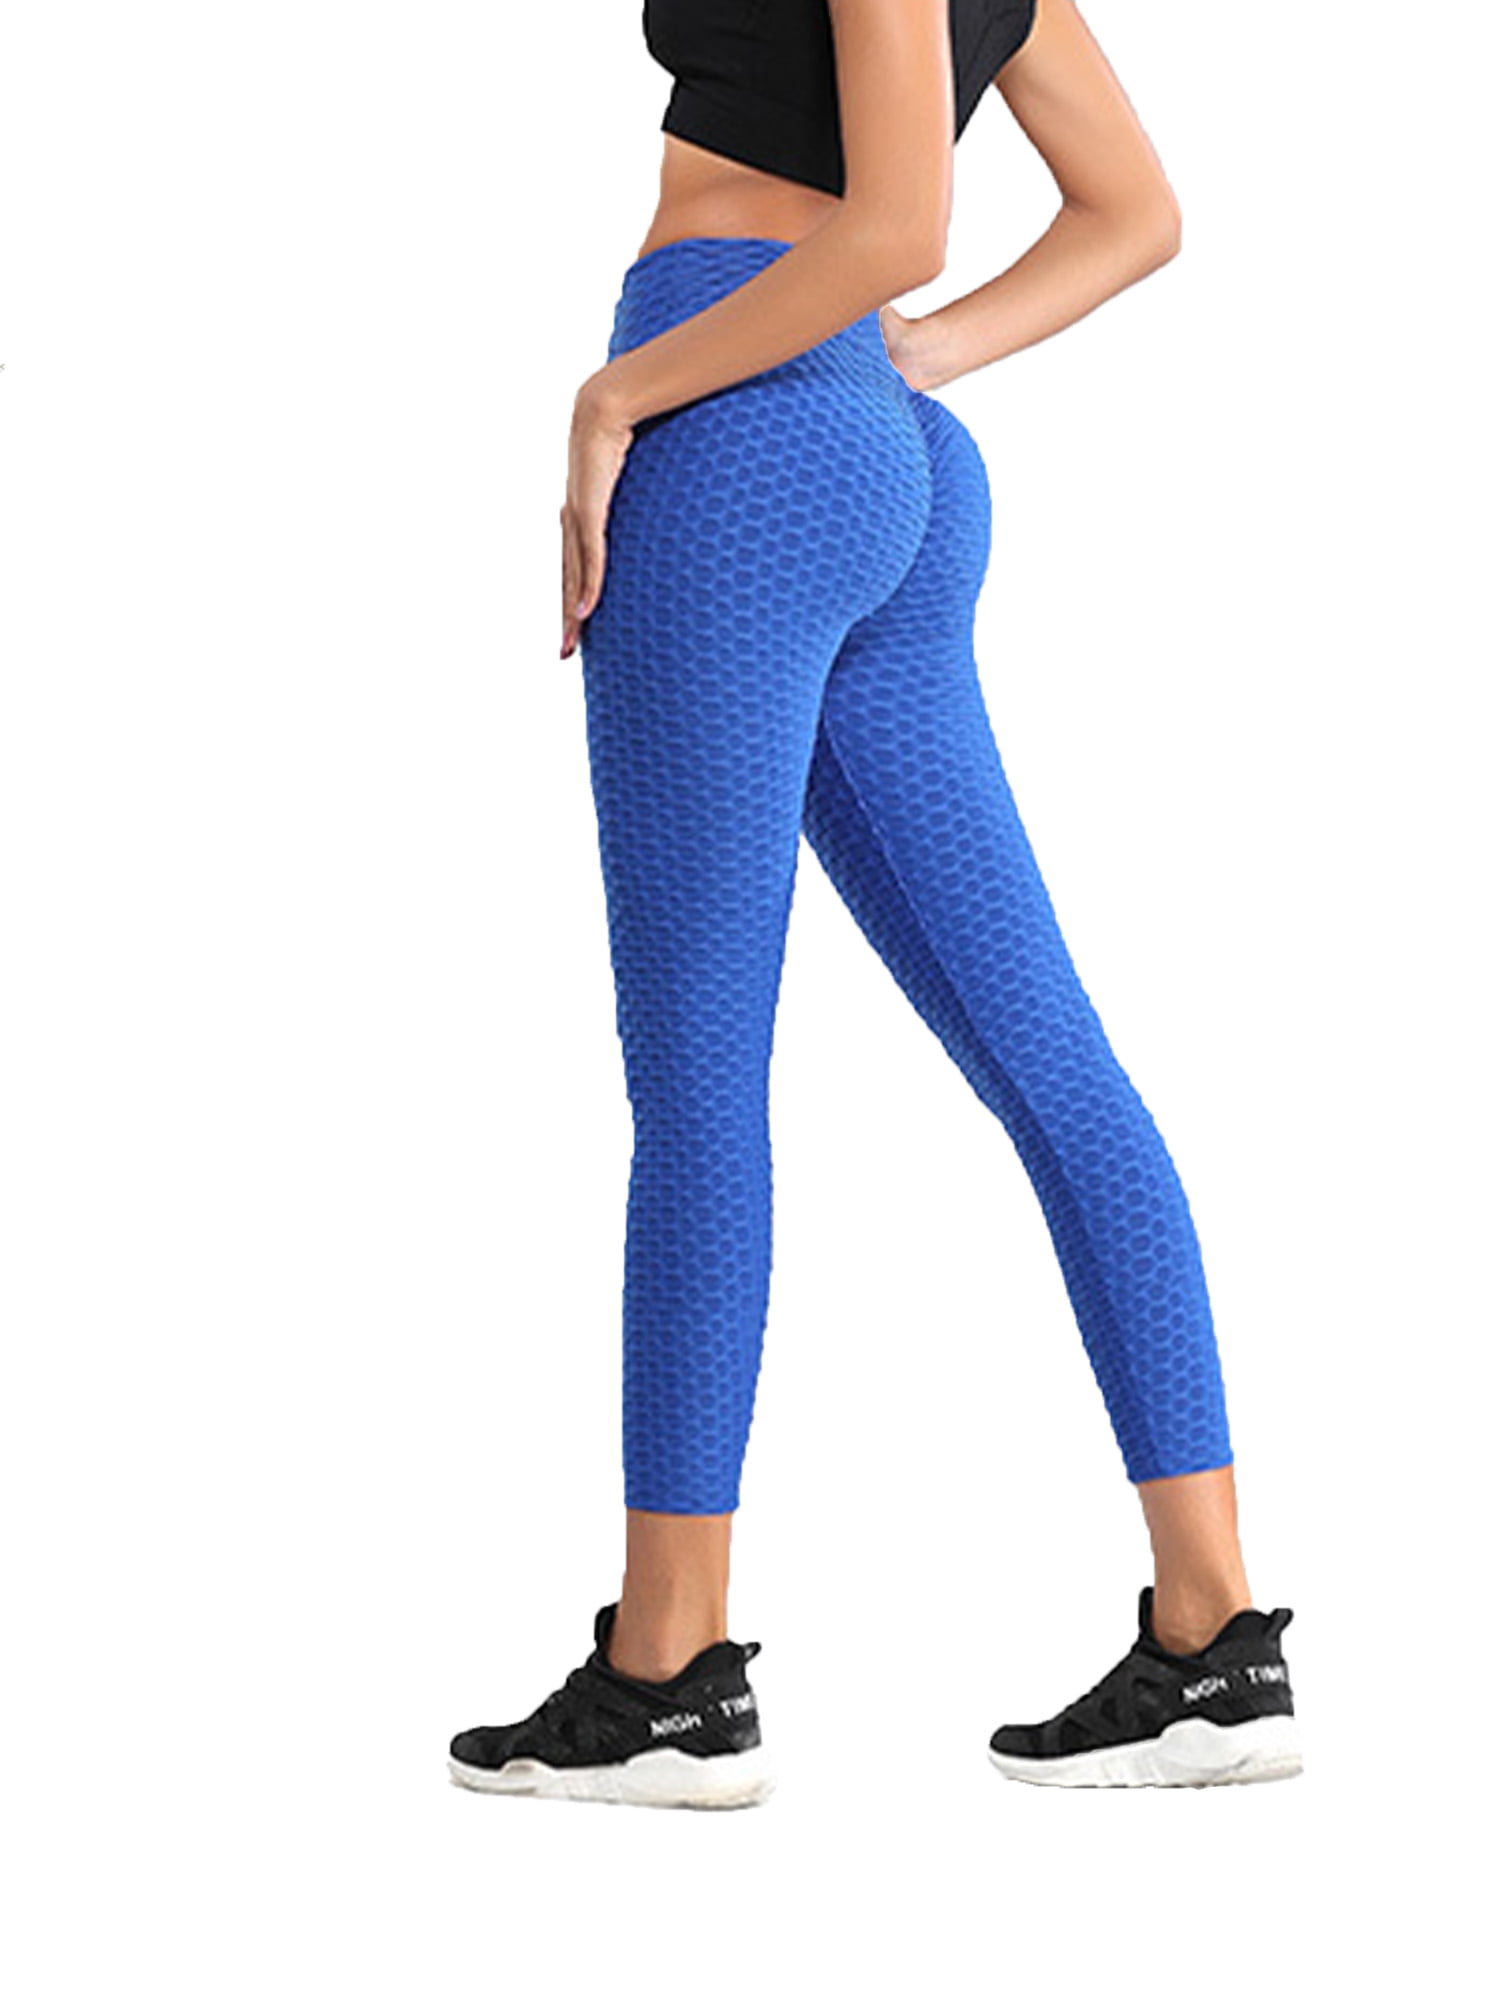 Women Push Up Yoga Leggings Sports Pants High Waist Gym Fitness Ruched Trousers 